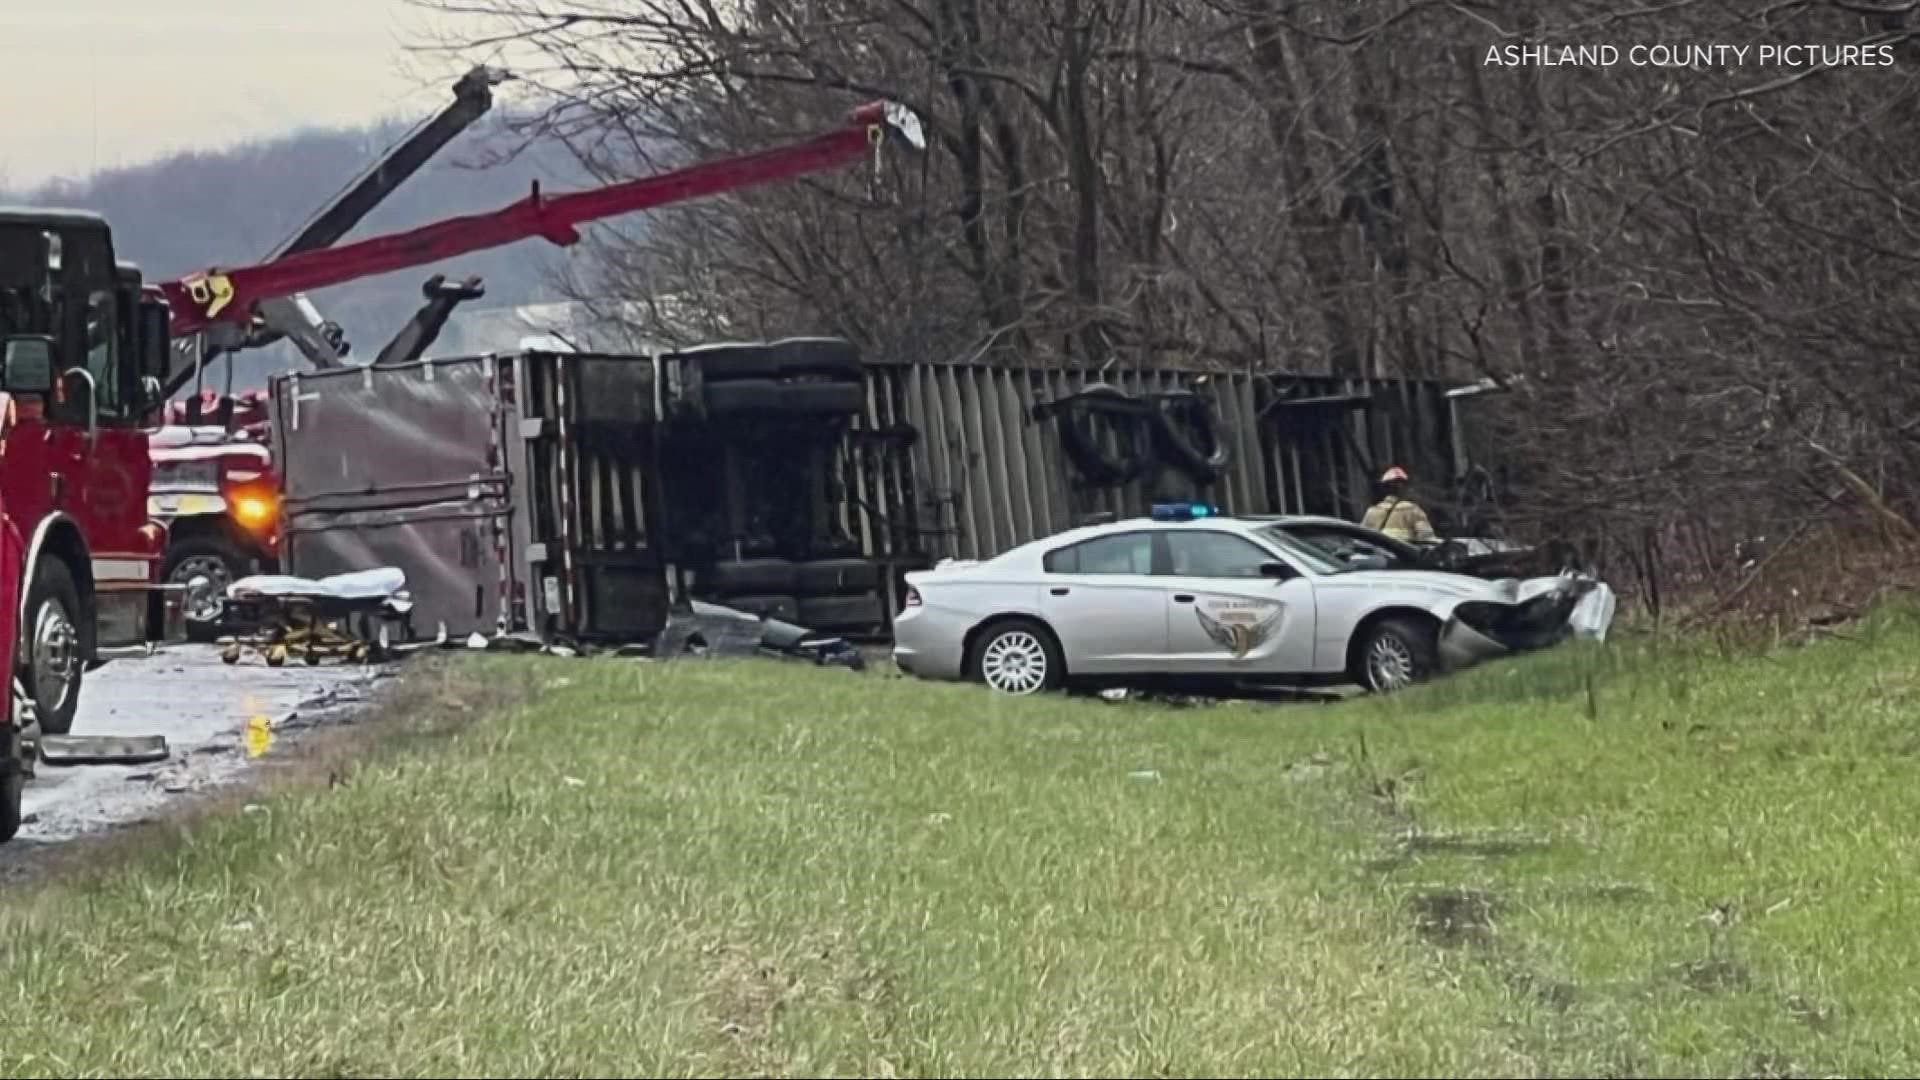 The incident happened on Monday afternoon. The firefighter has been identified as 35-year-old Lt. Philip M. Wigal of the Town & Country Fire District.